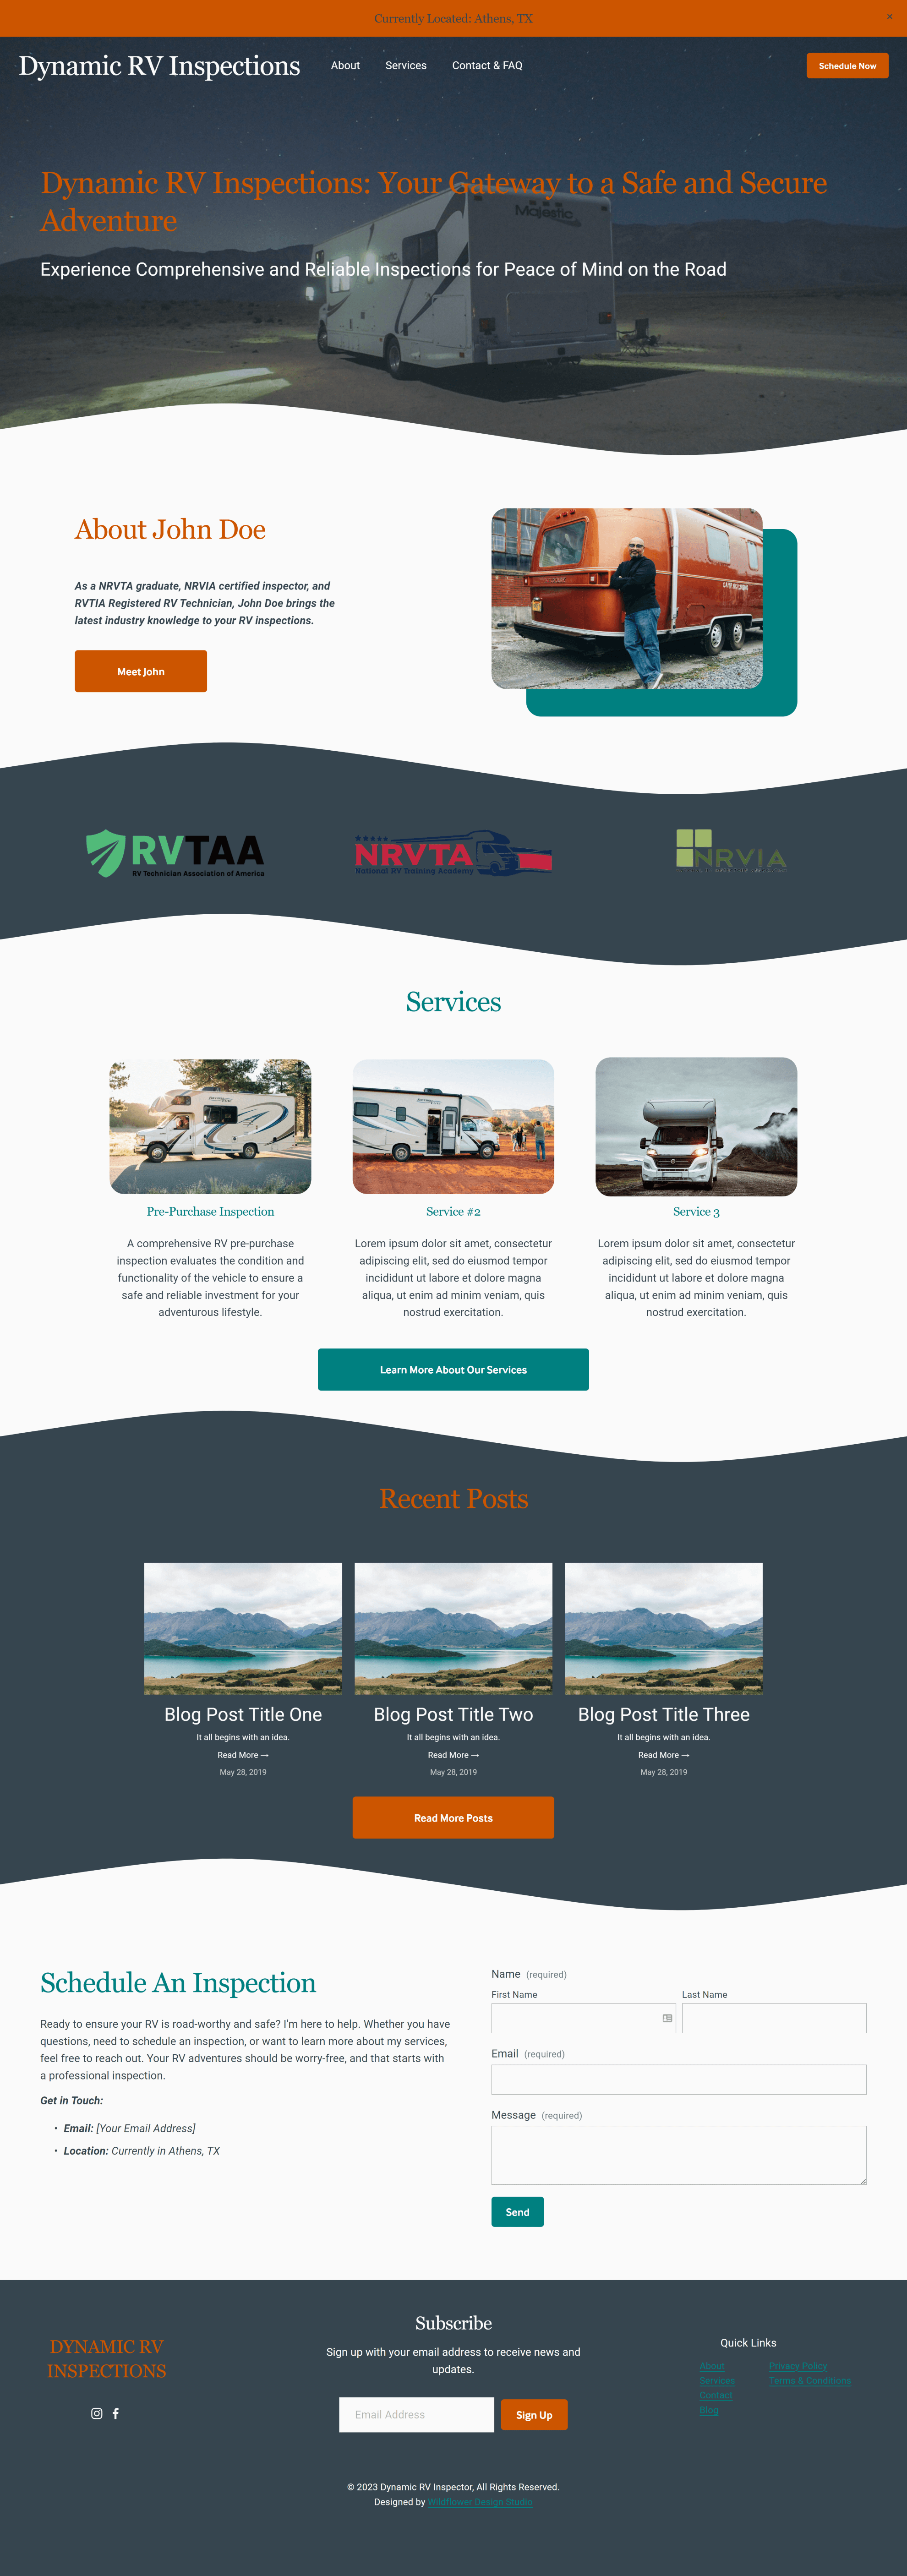 Home Page Full - Wildflower Design Studio - Dynamic RV Inspections.png